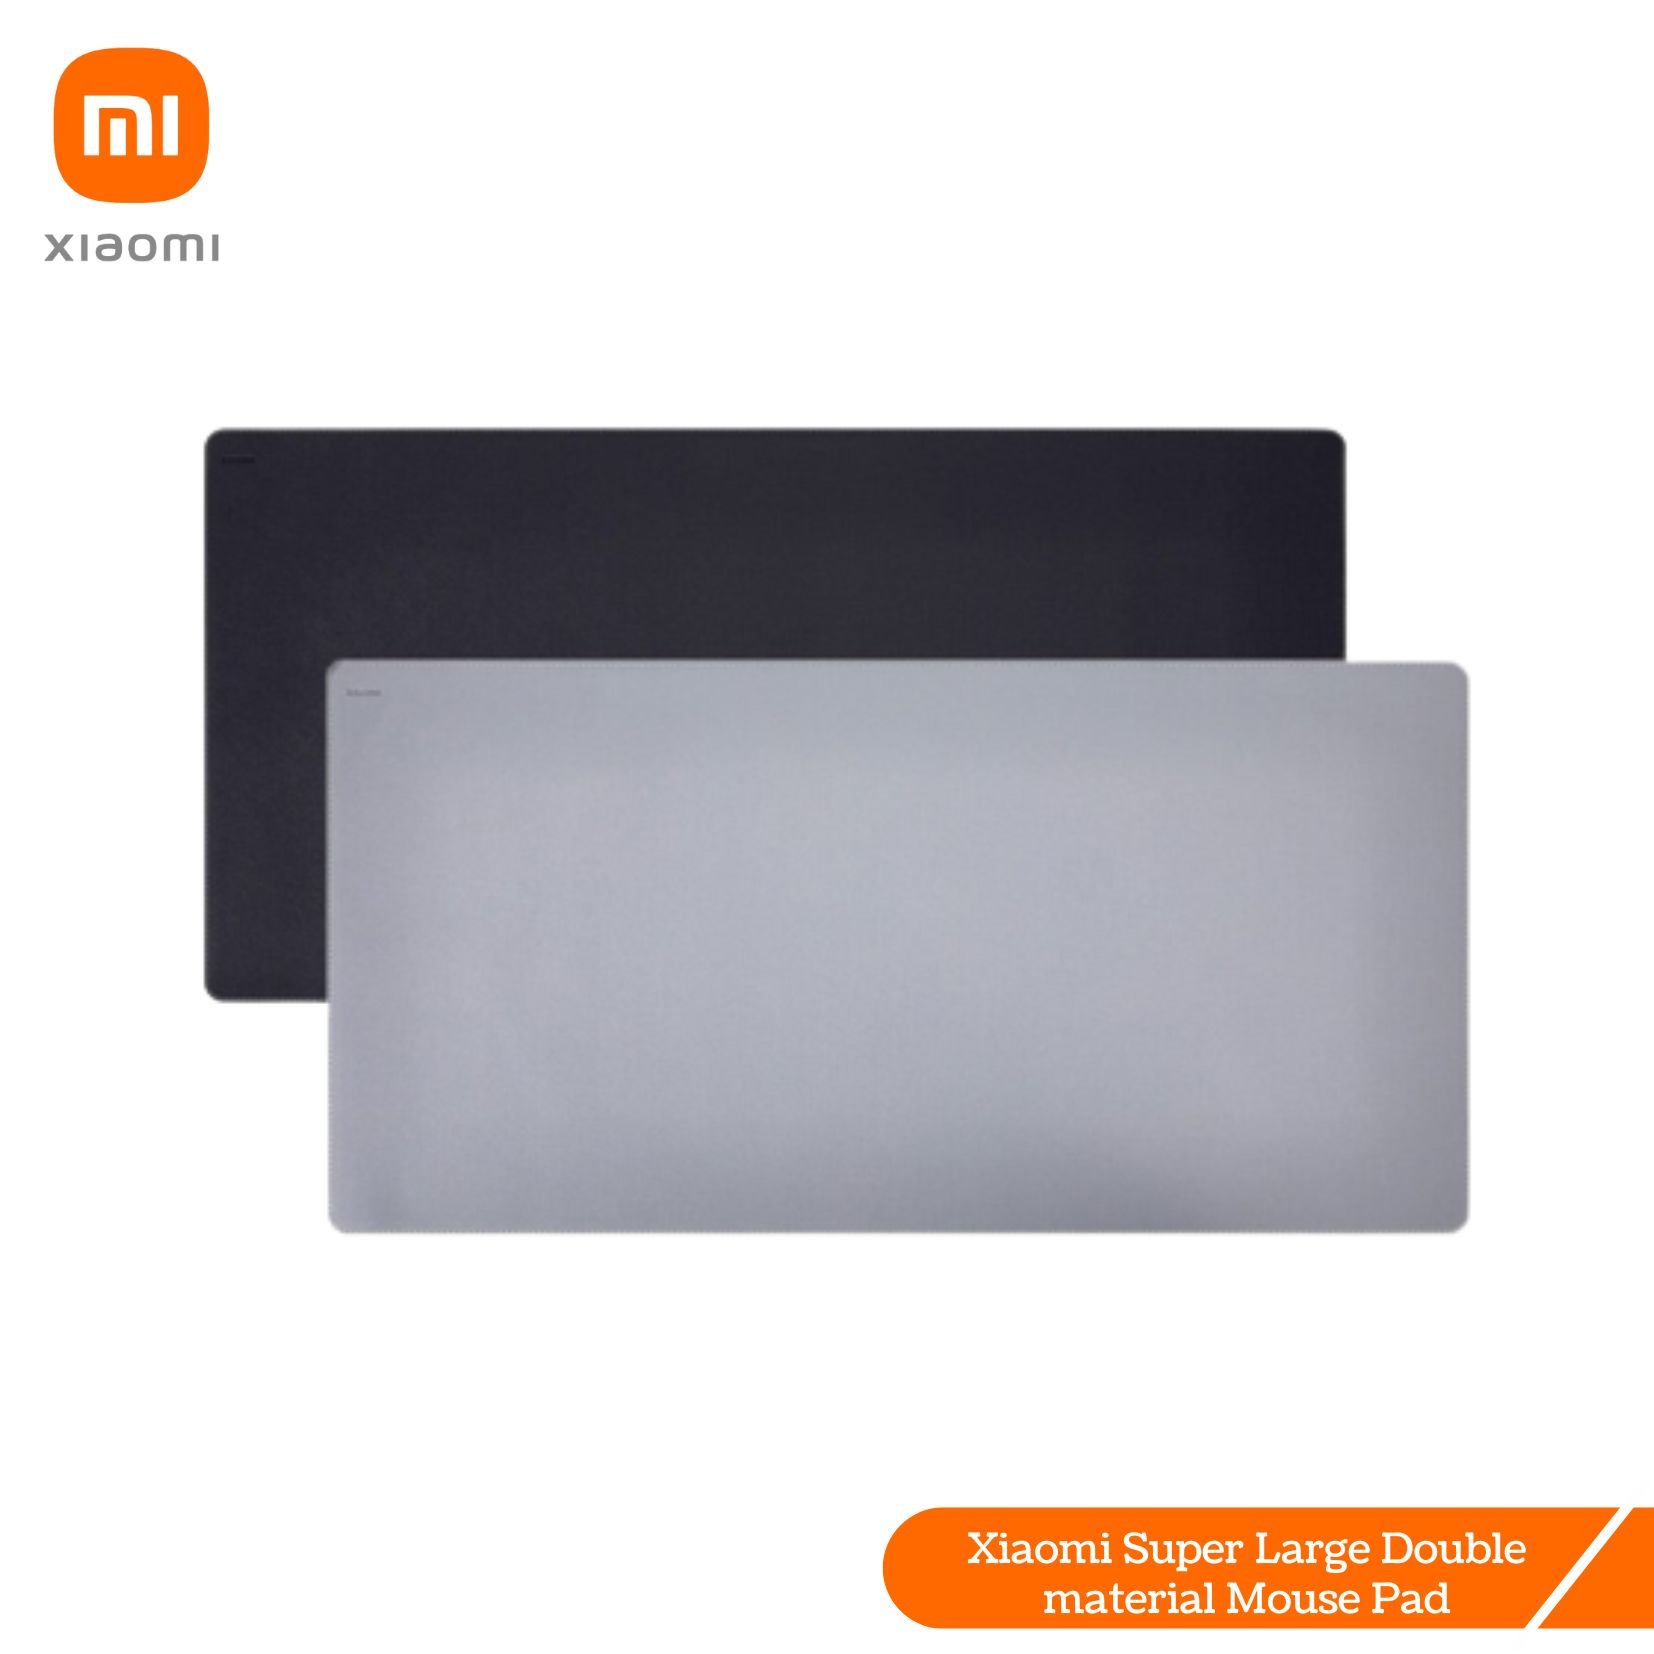 Xiaomi Super Large Double material Mouse Pad